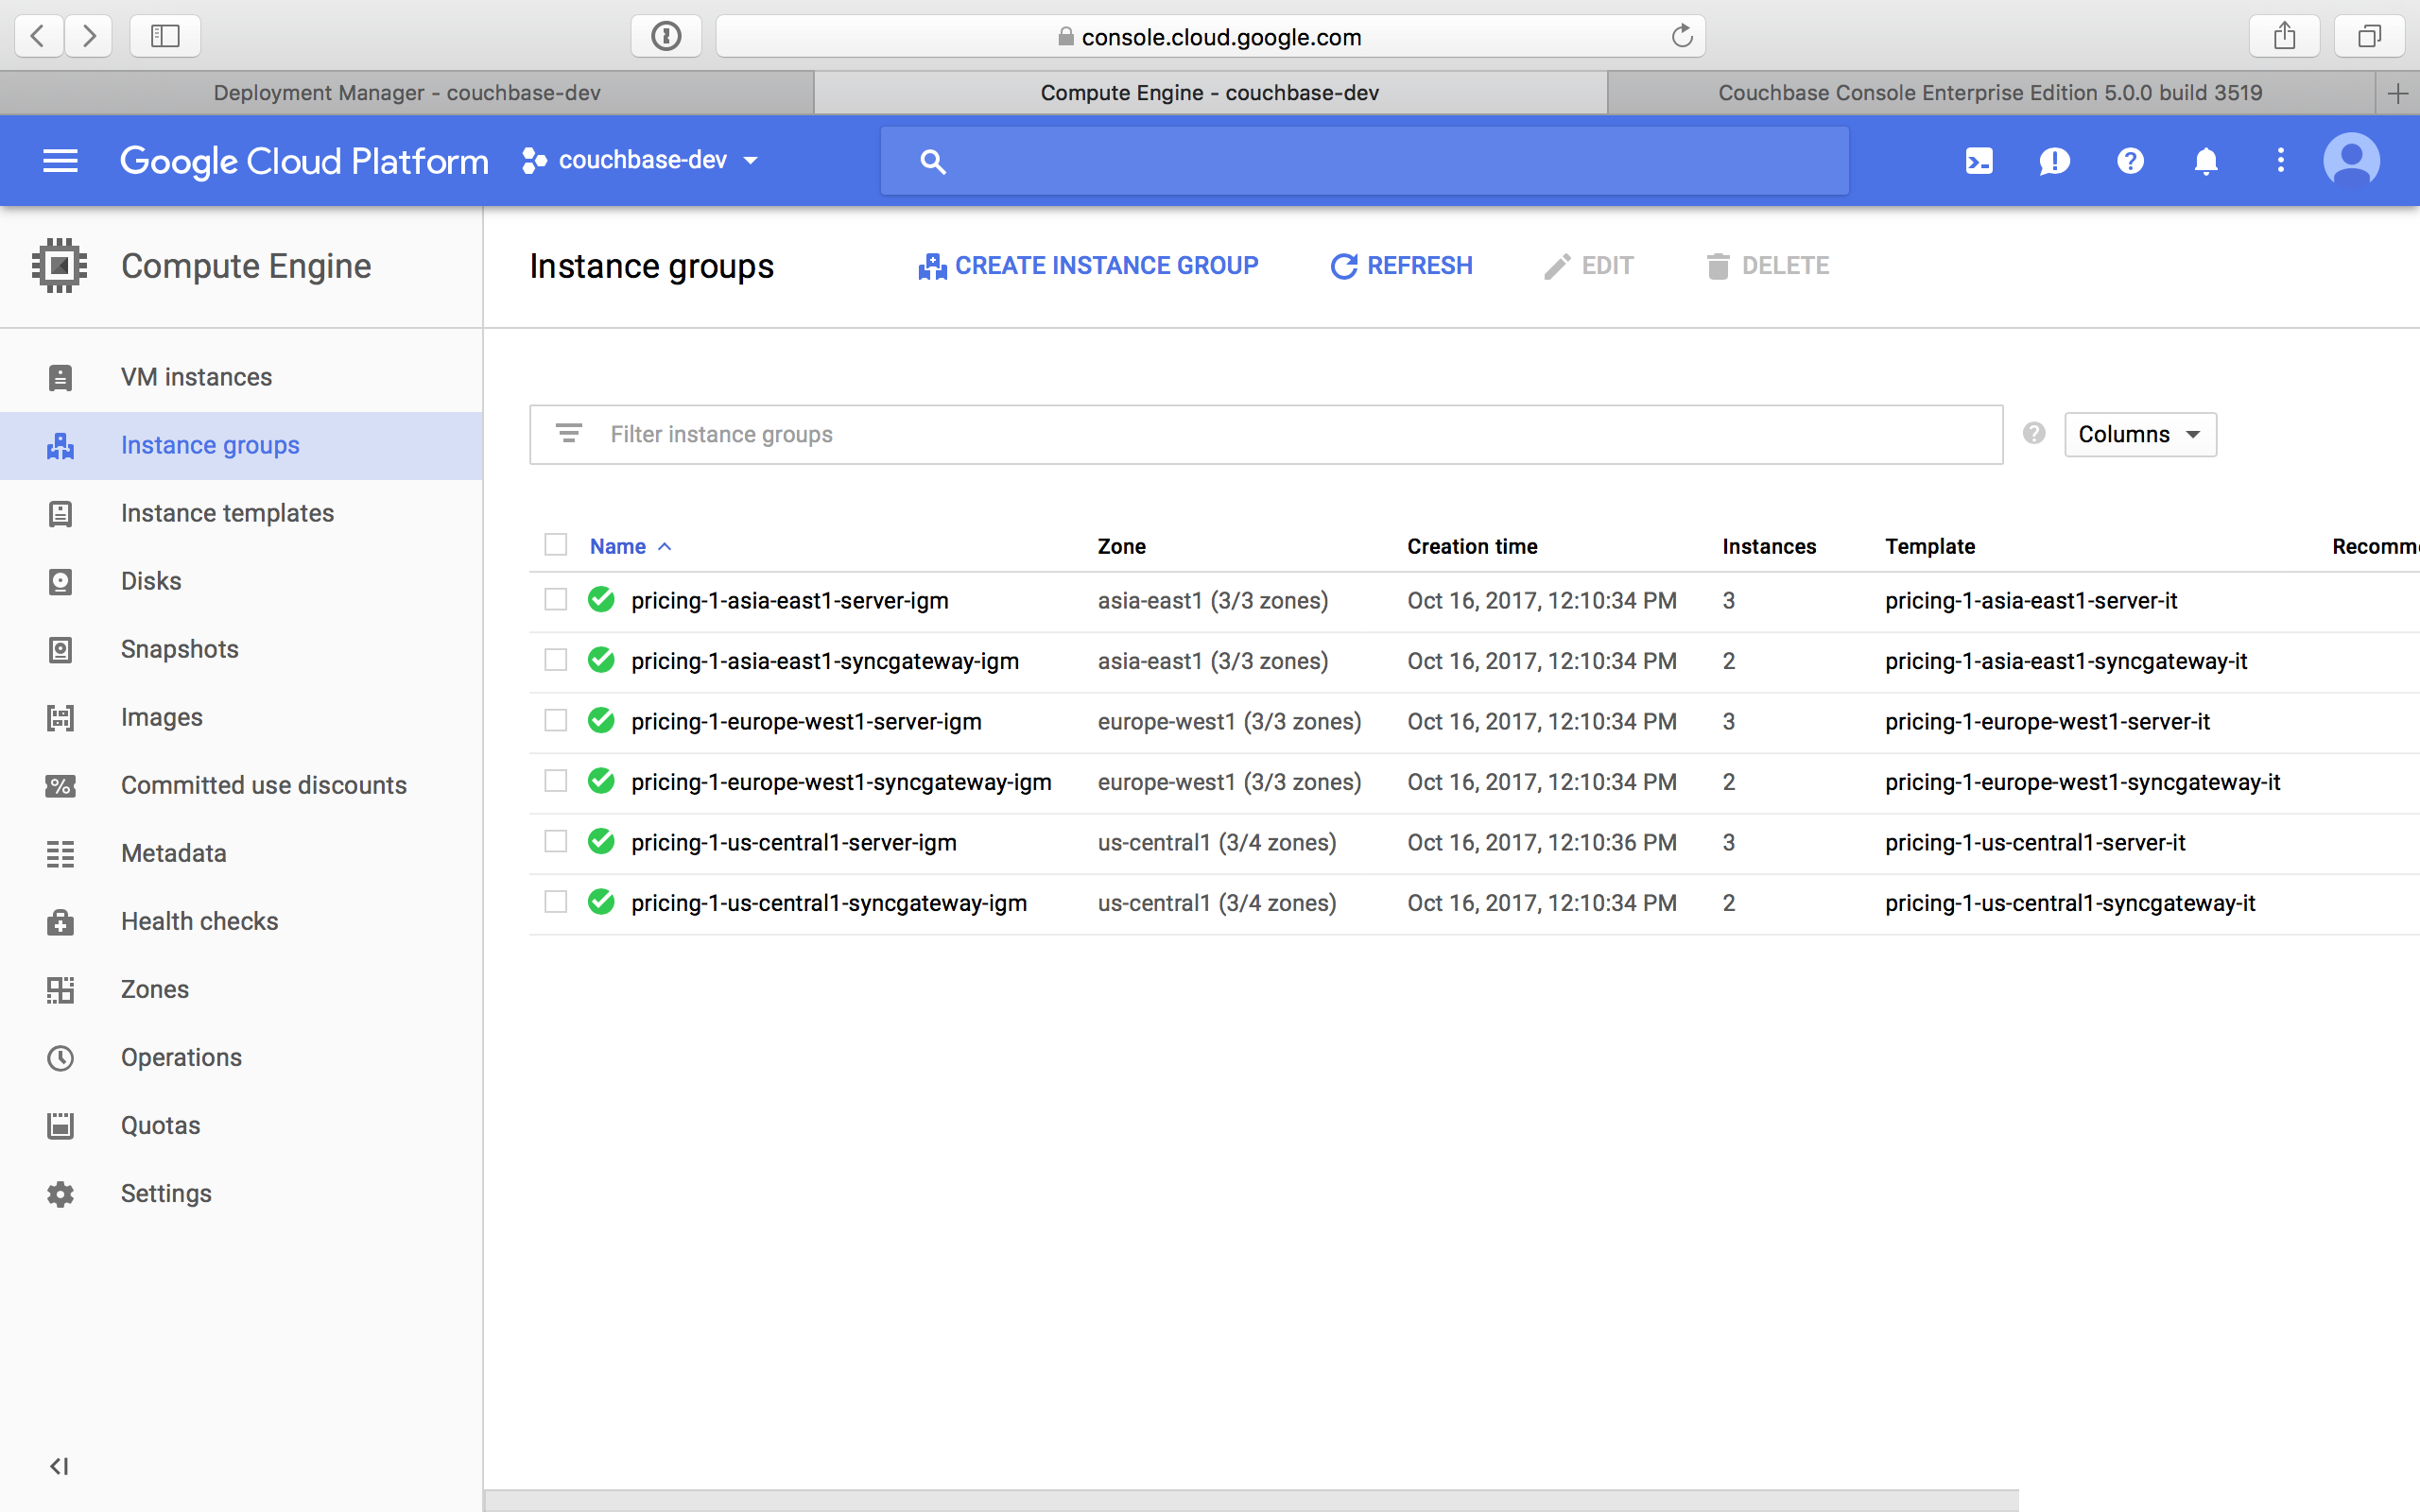 gcp instance groups